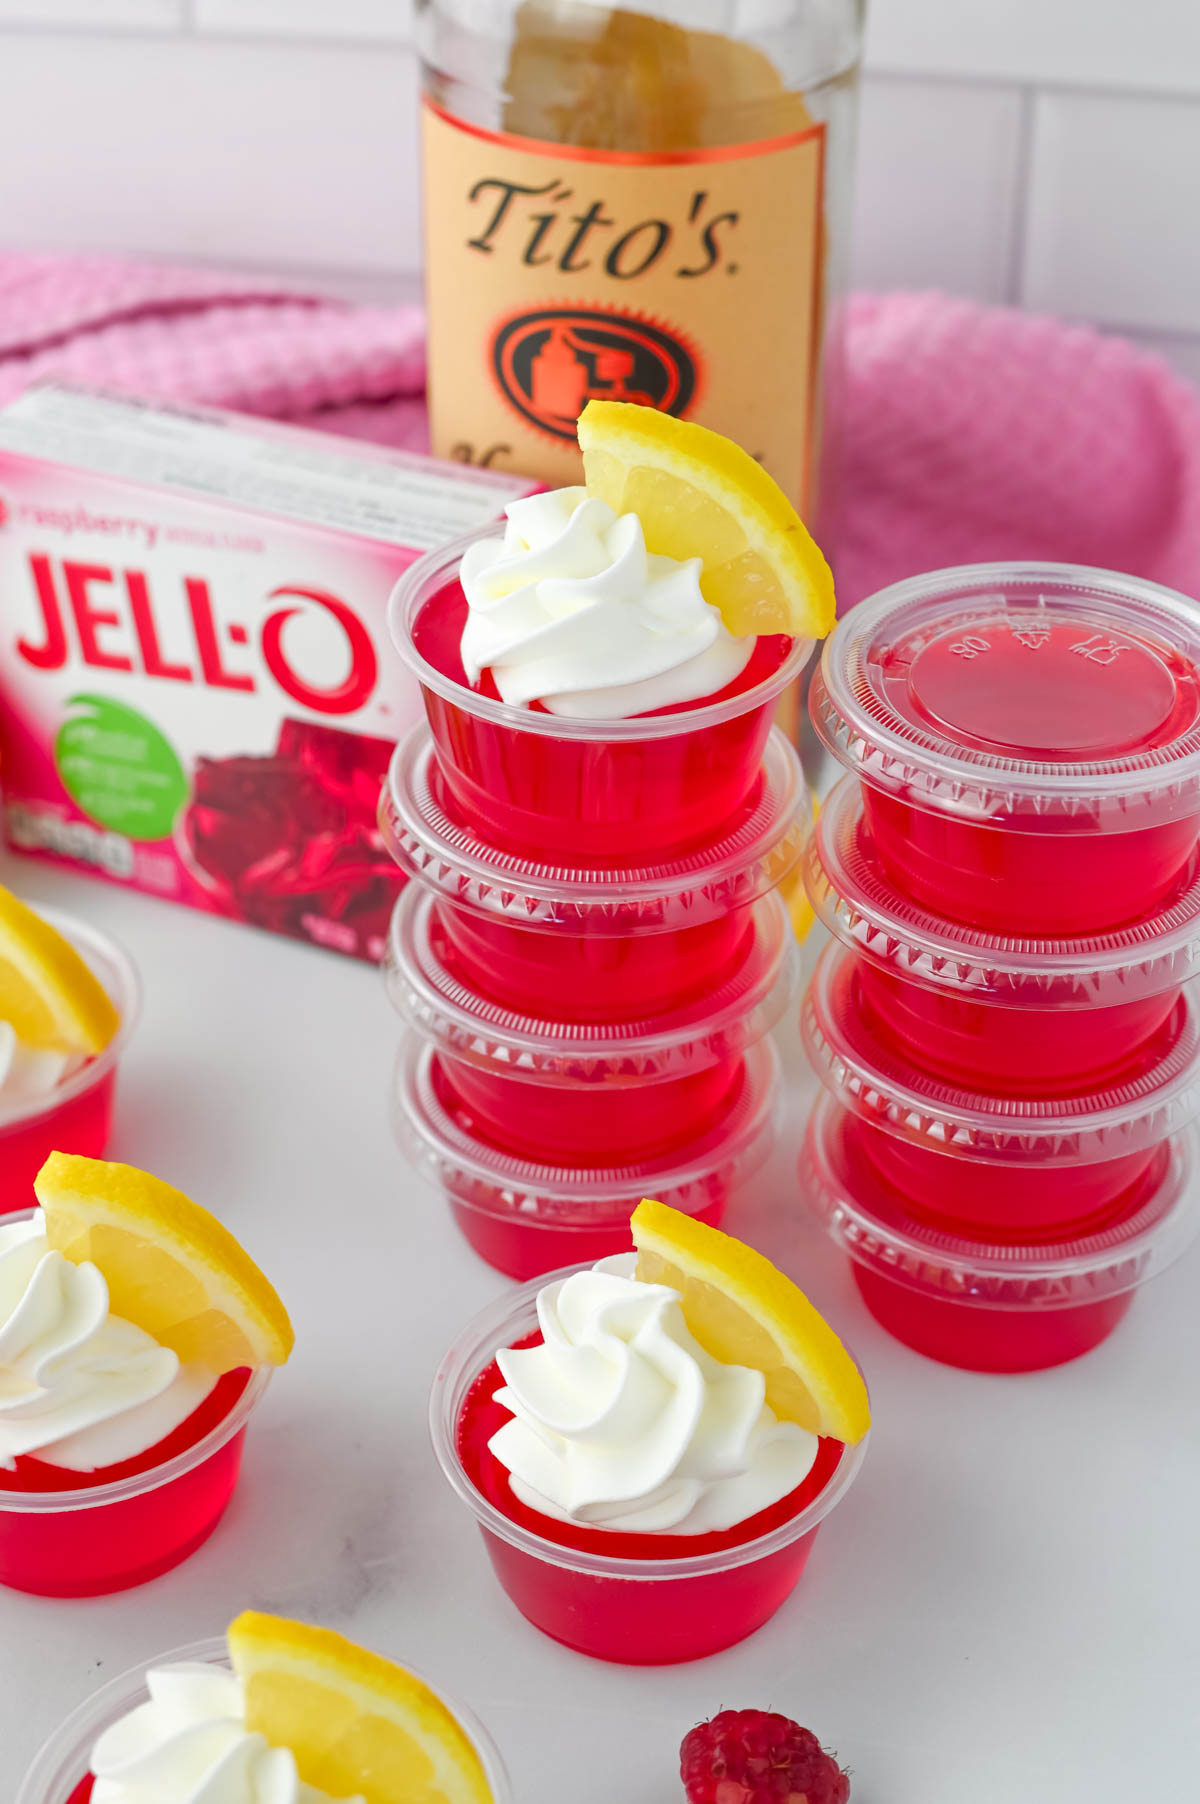 A tray of jello shots with lemon slices and a bottle of tito's.